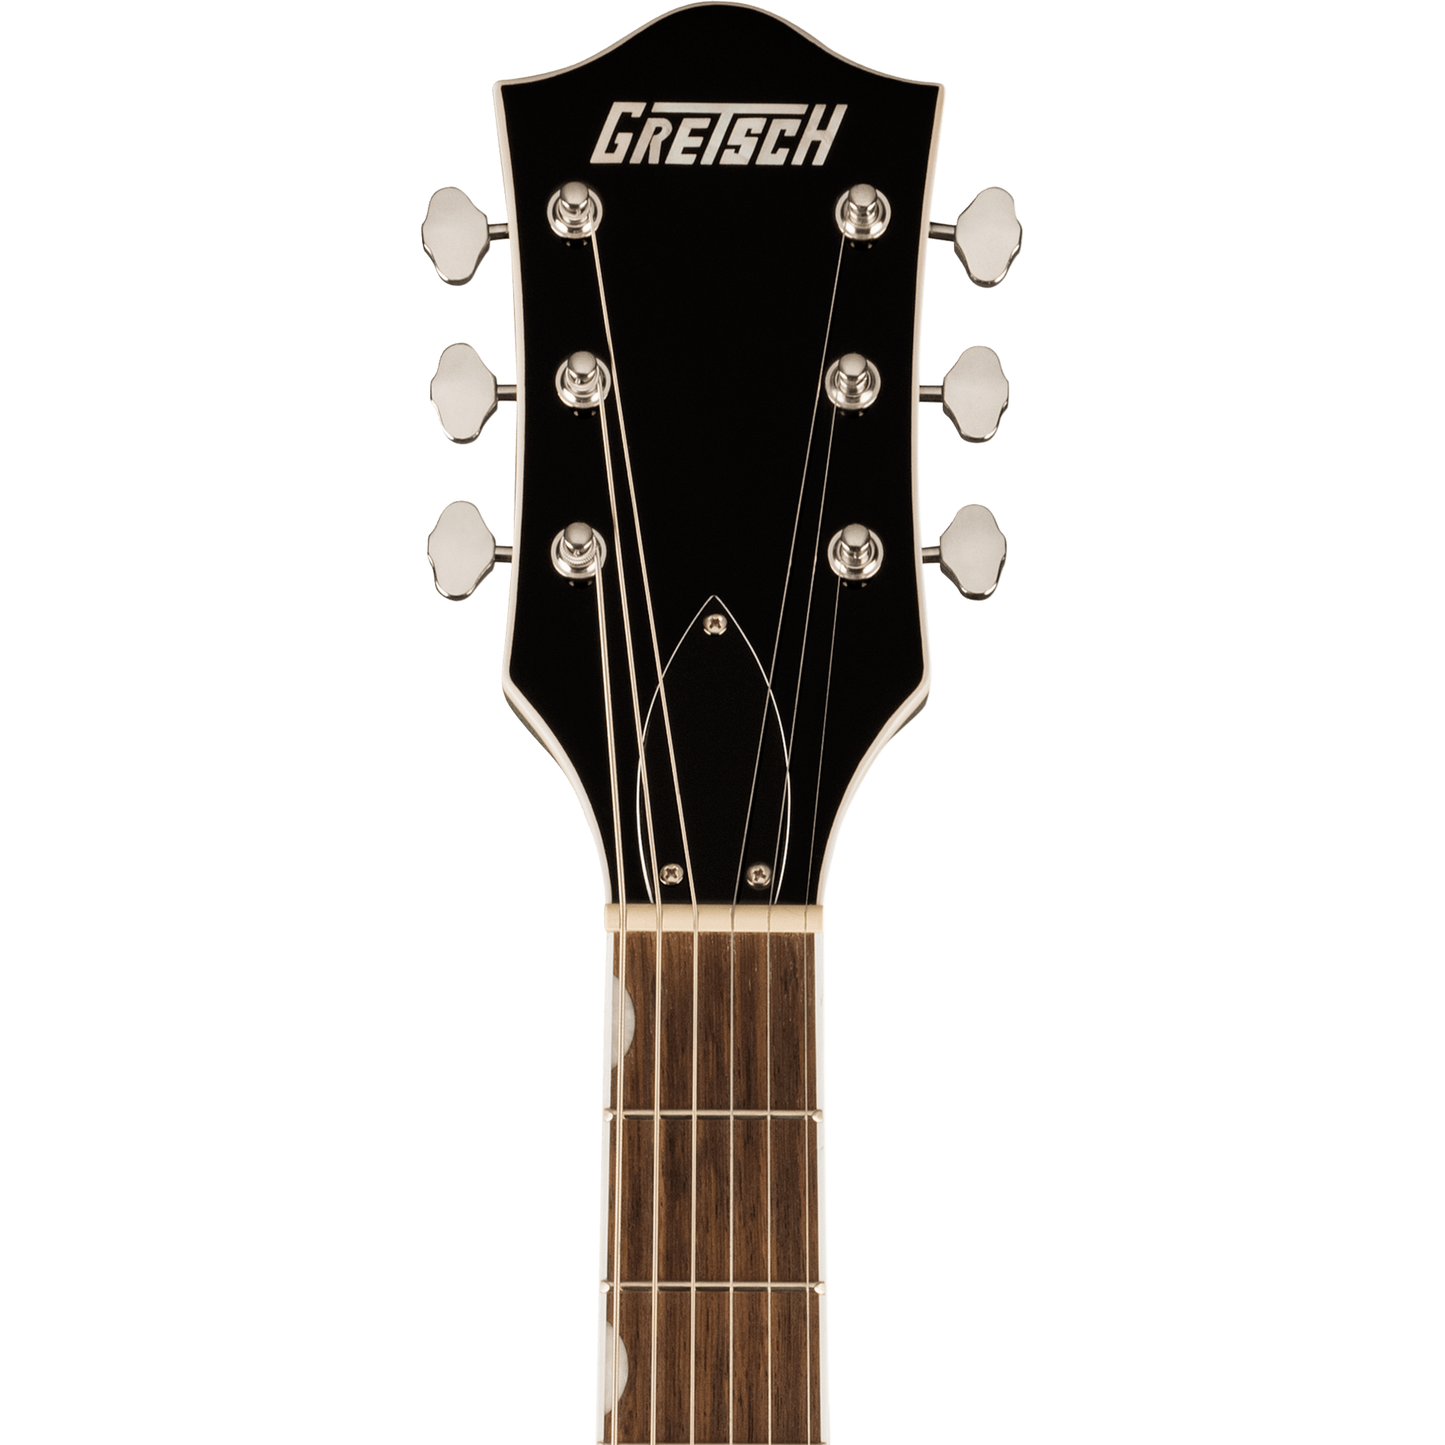 Gretsch G5420T Electromatic Classic Electric Guitar - Two-Tone Anniversary Green